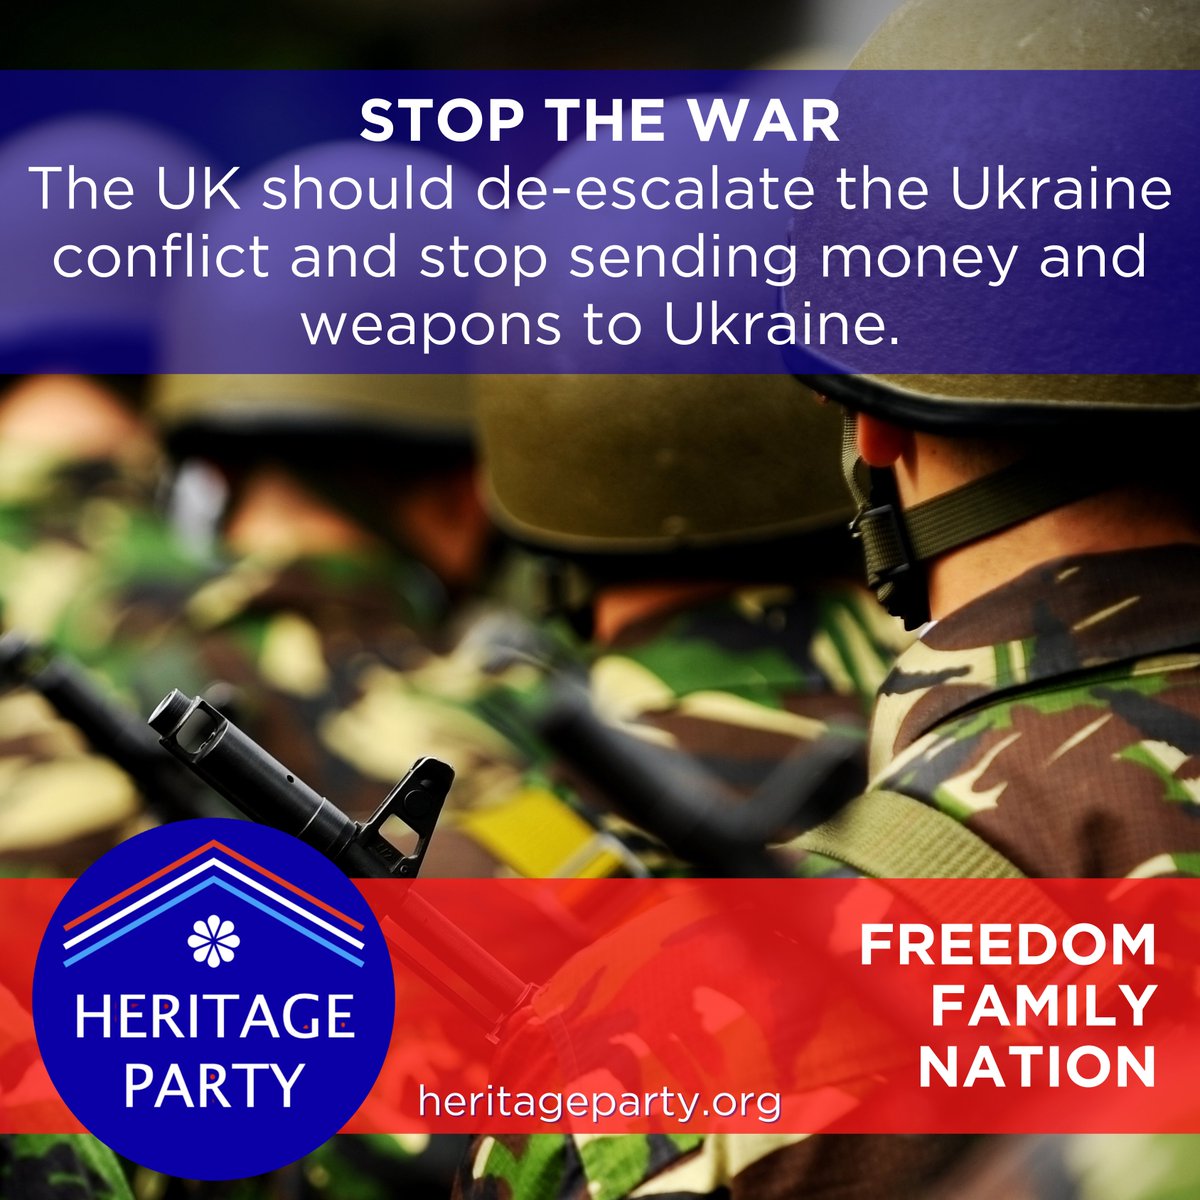 STOP THE WAR. #PeaceWithRussia heritageparty.org